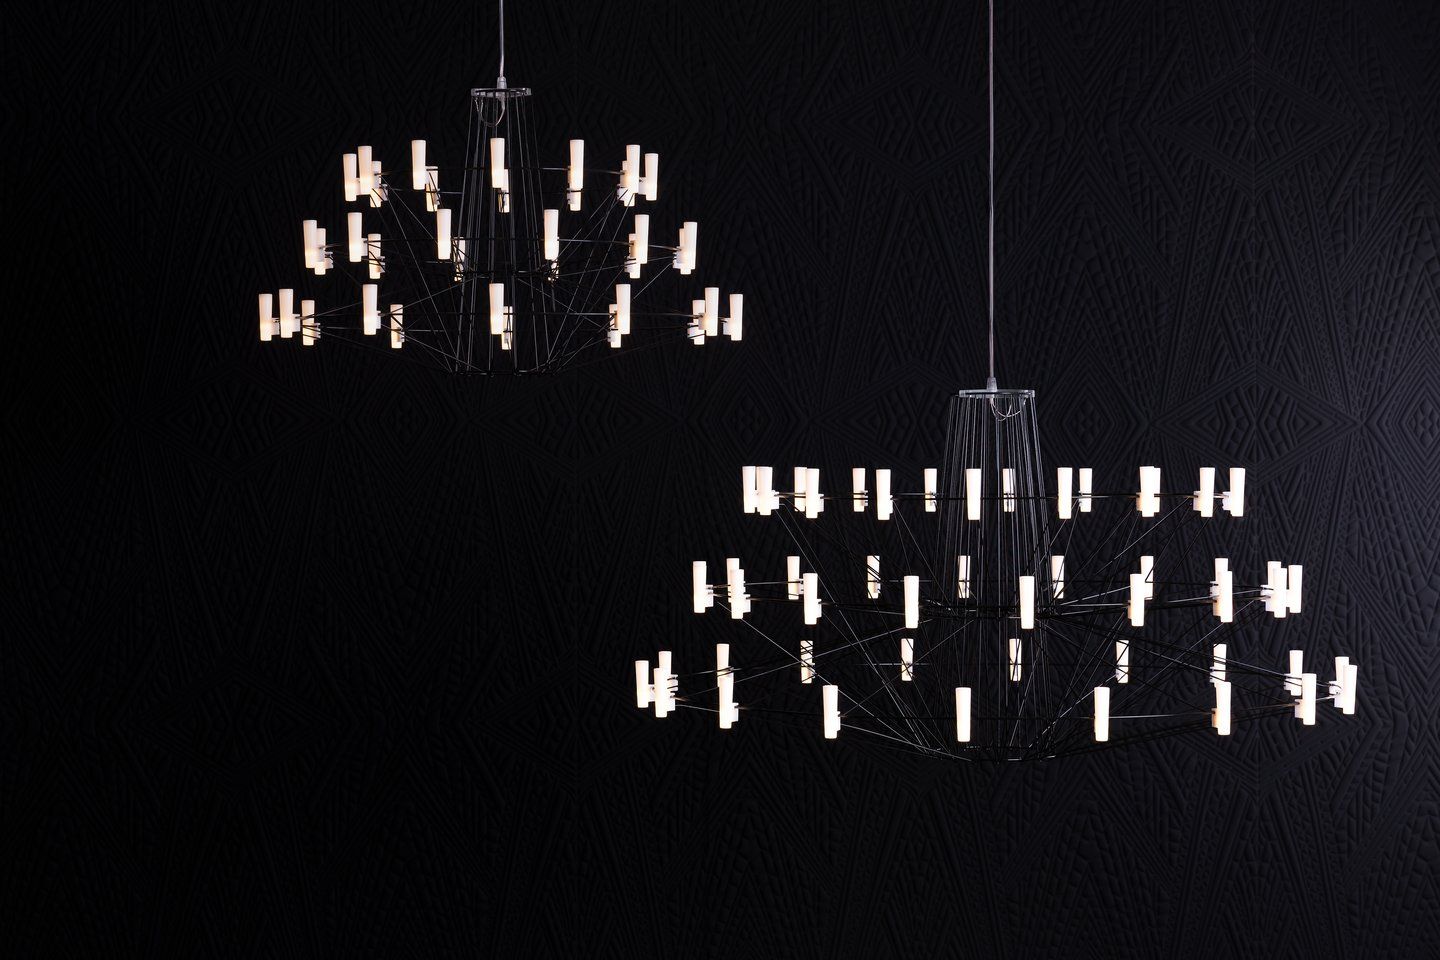 Chandelier COPPELIA by Moooi